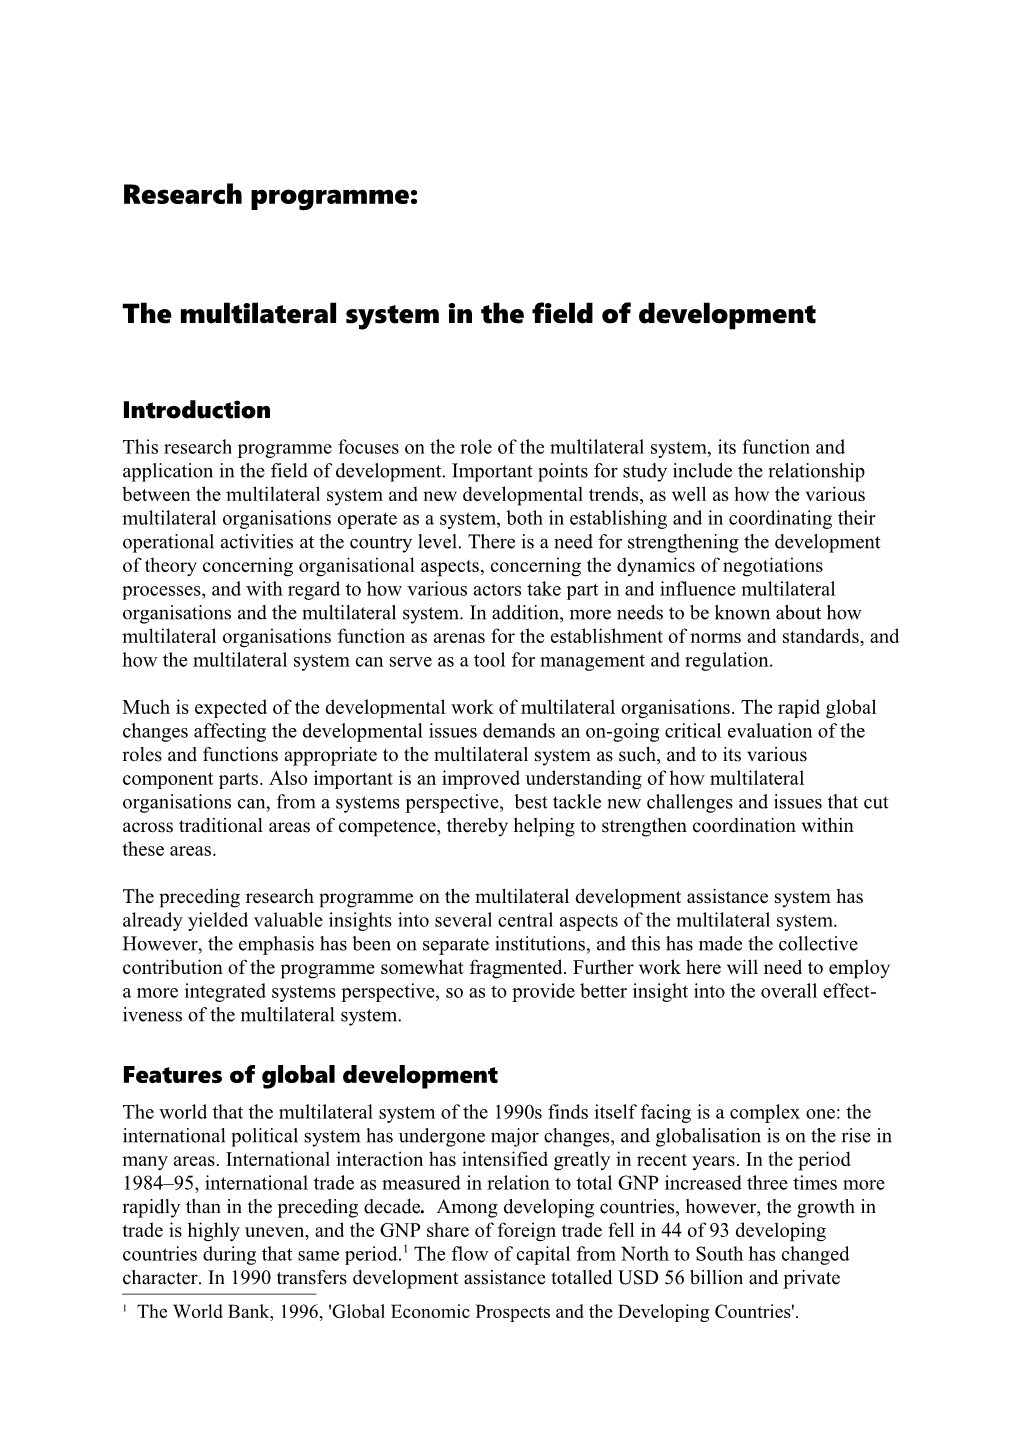 The Multilateral System in the Field of Development